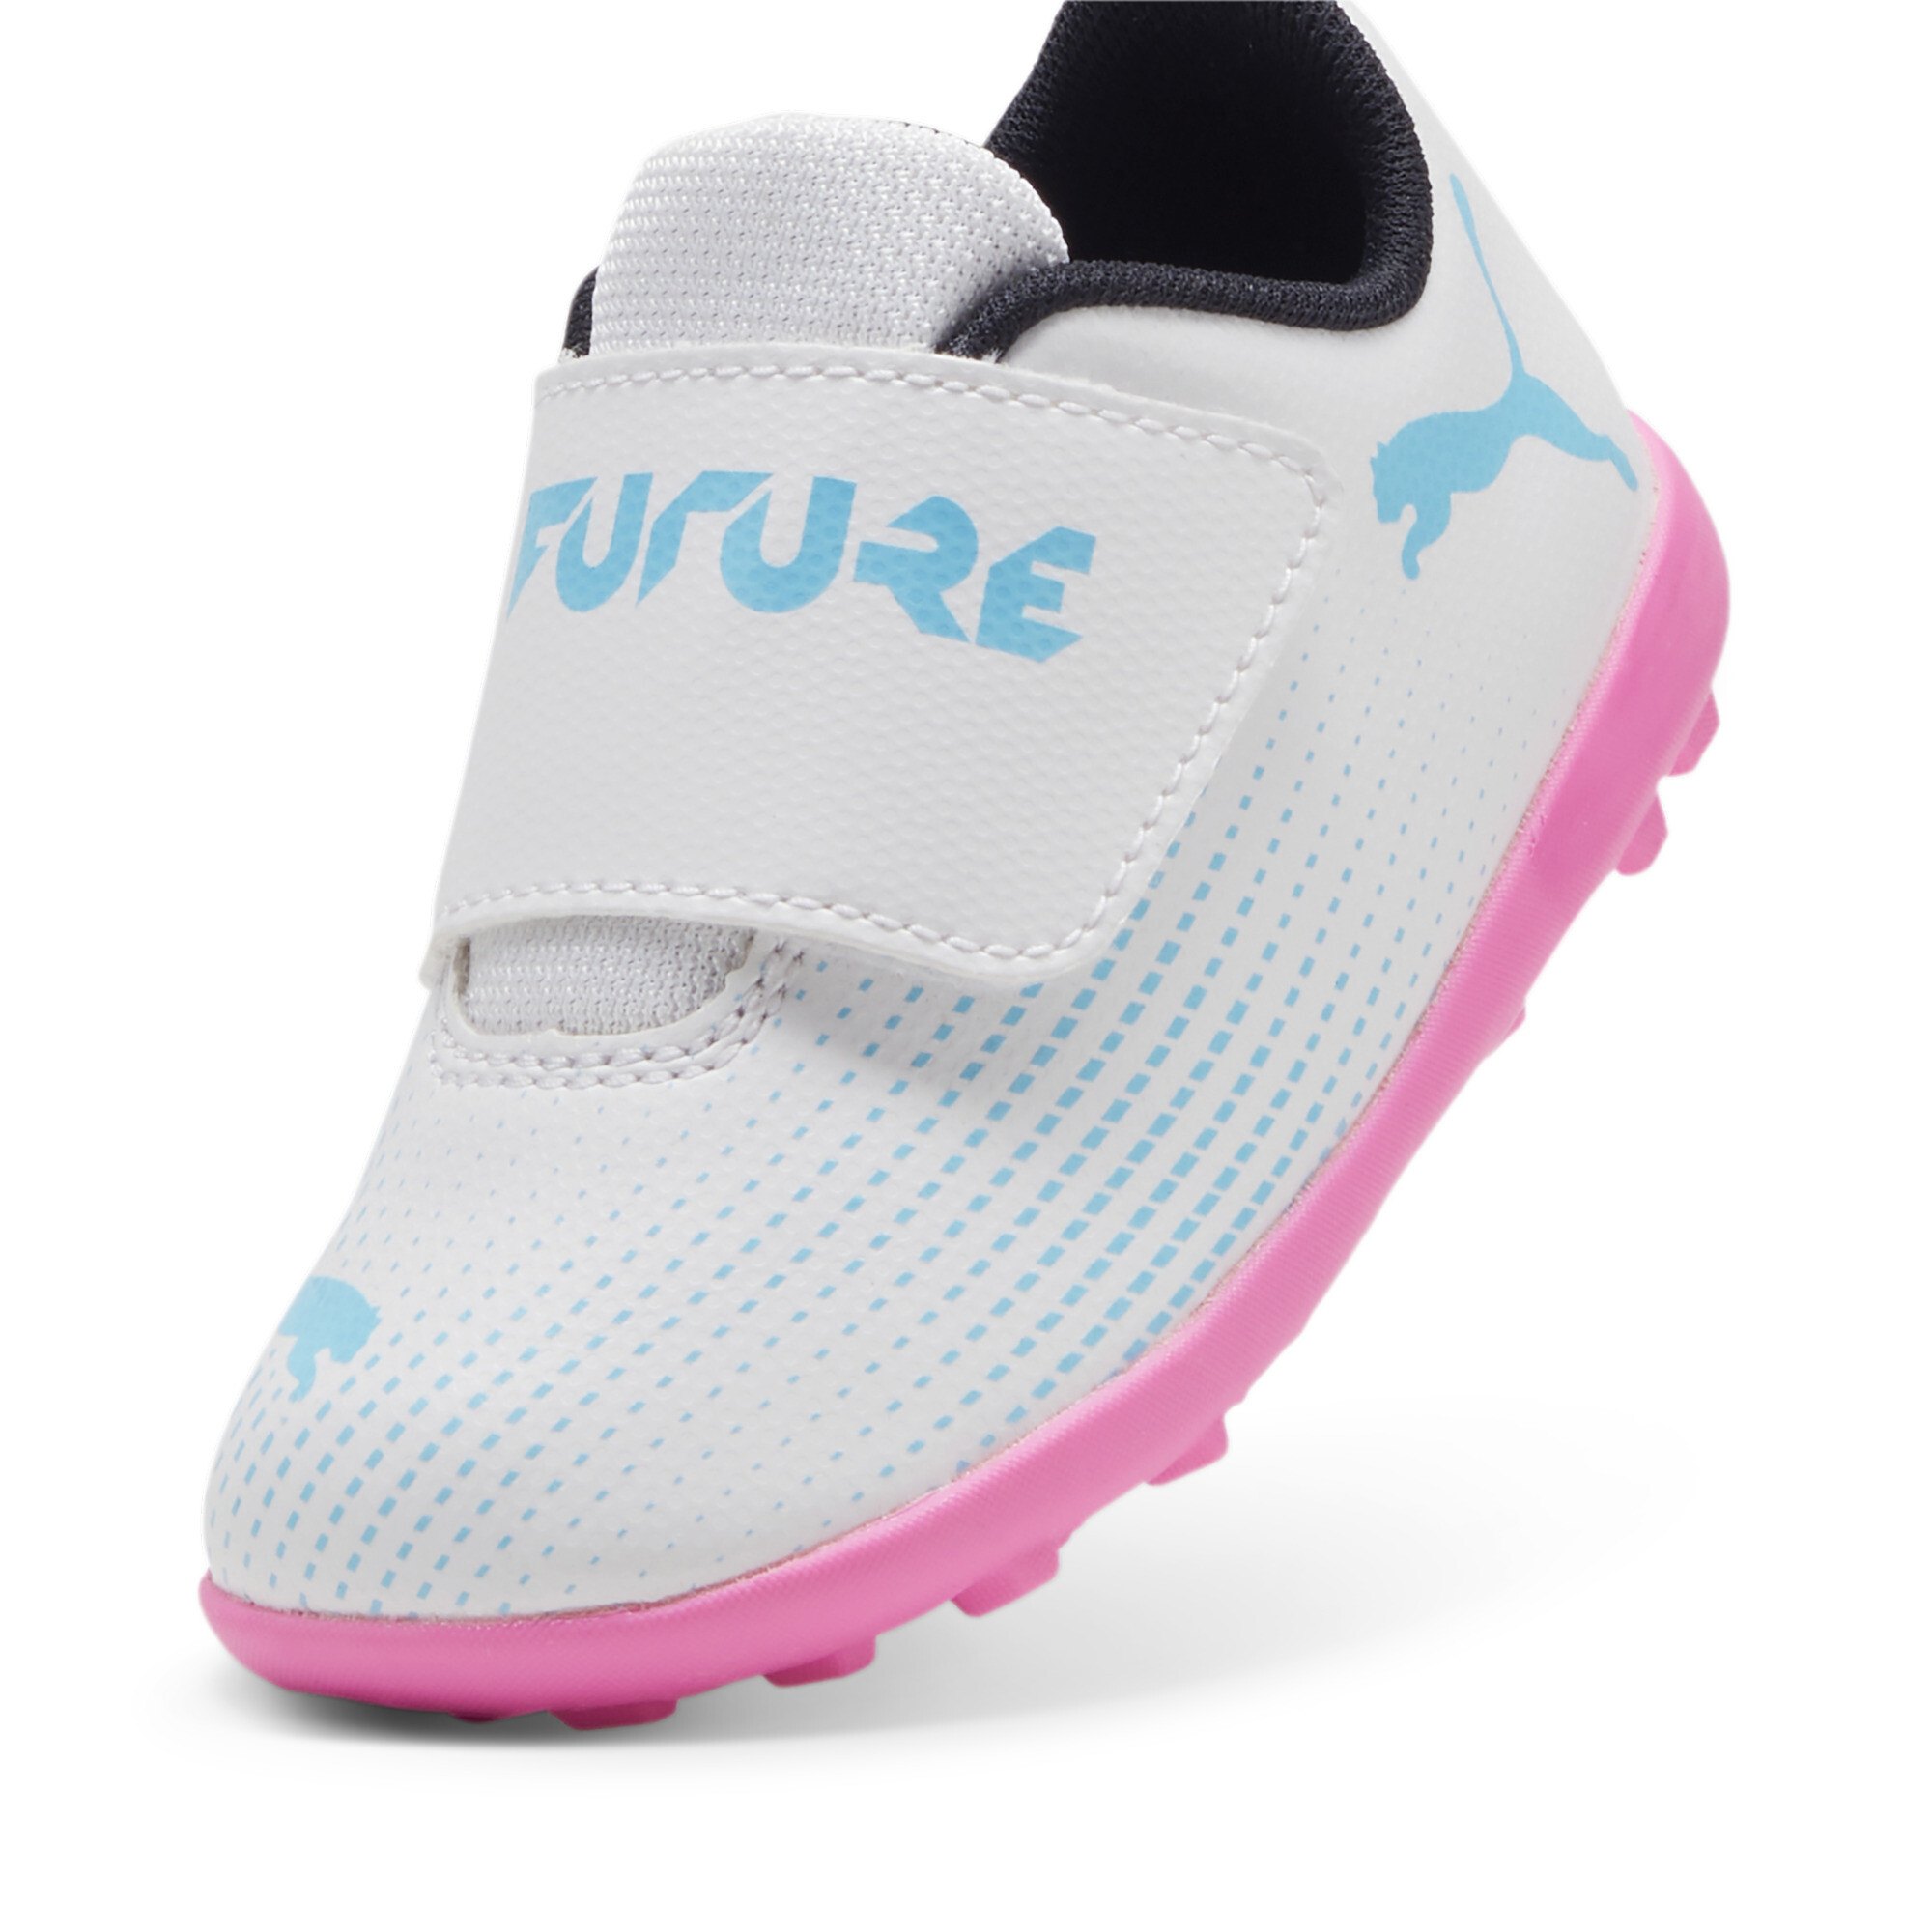 Kids' PUMA FUTURE 7 PLAY TT Toddlers' Football Boots In White/Pink, Size EU 19